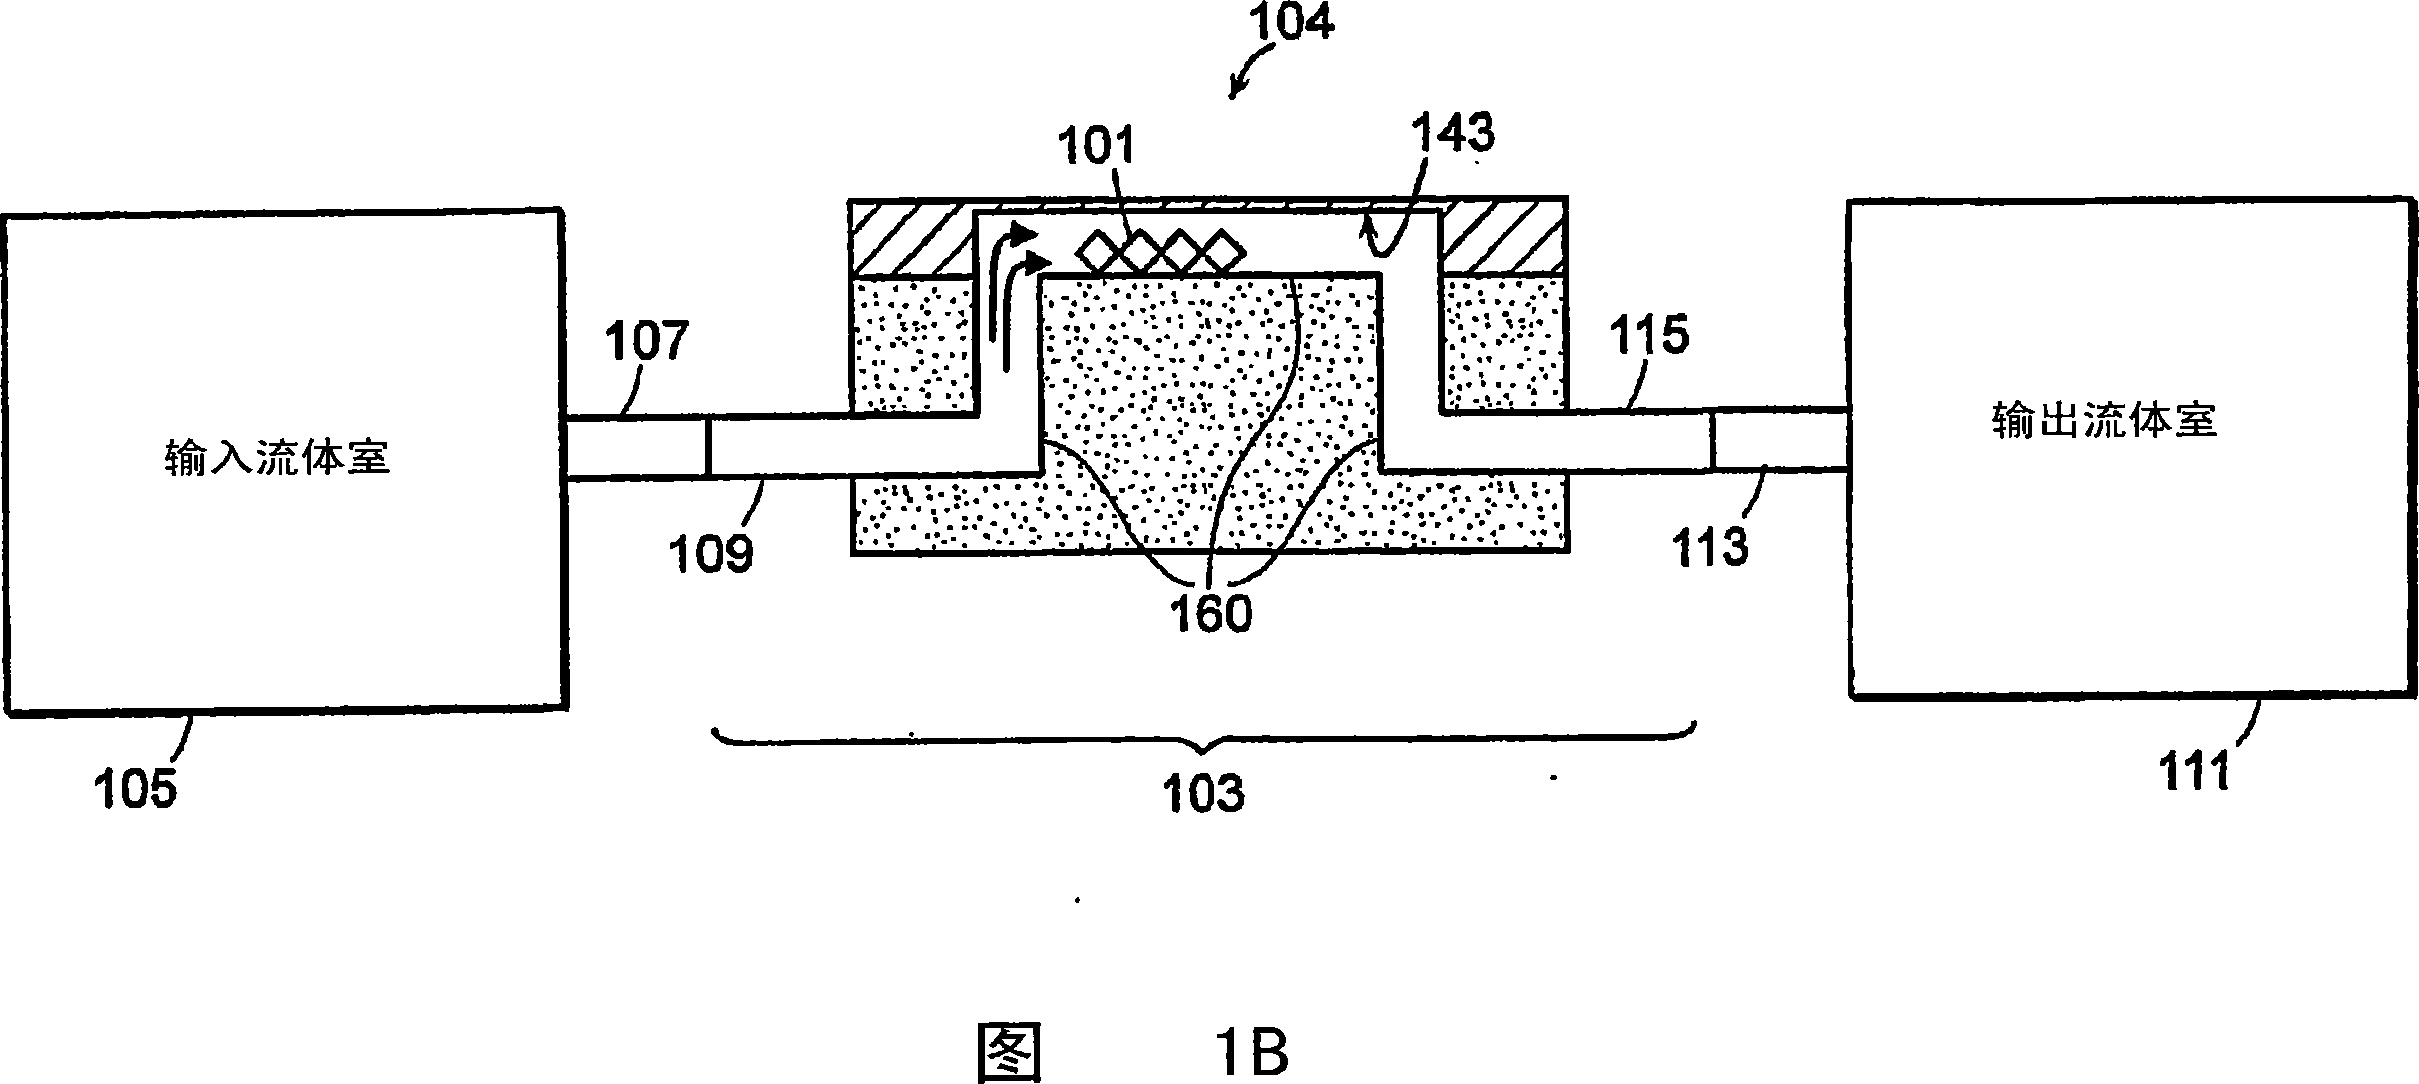 Method and apparatus for detecting analytes using an acoustic device